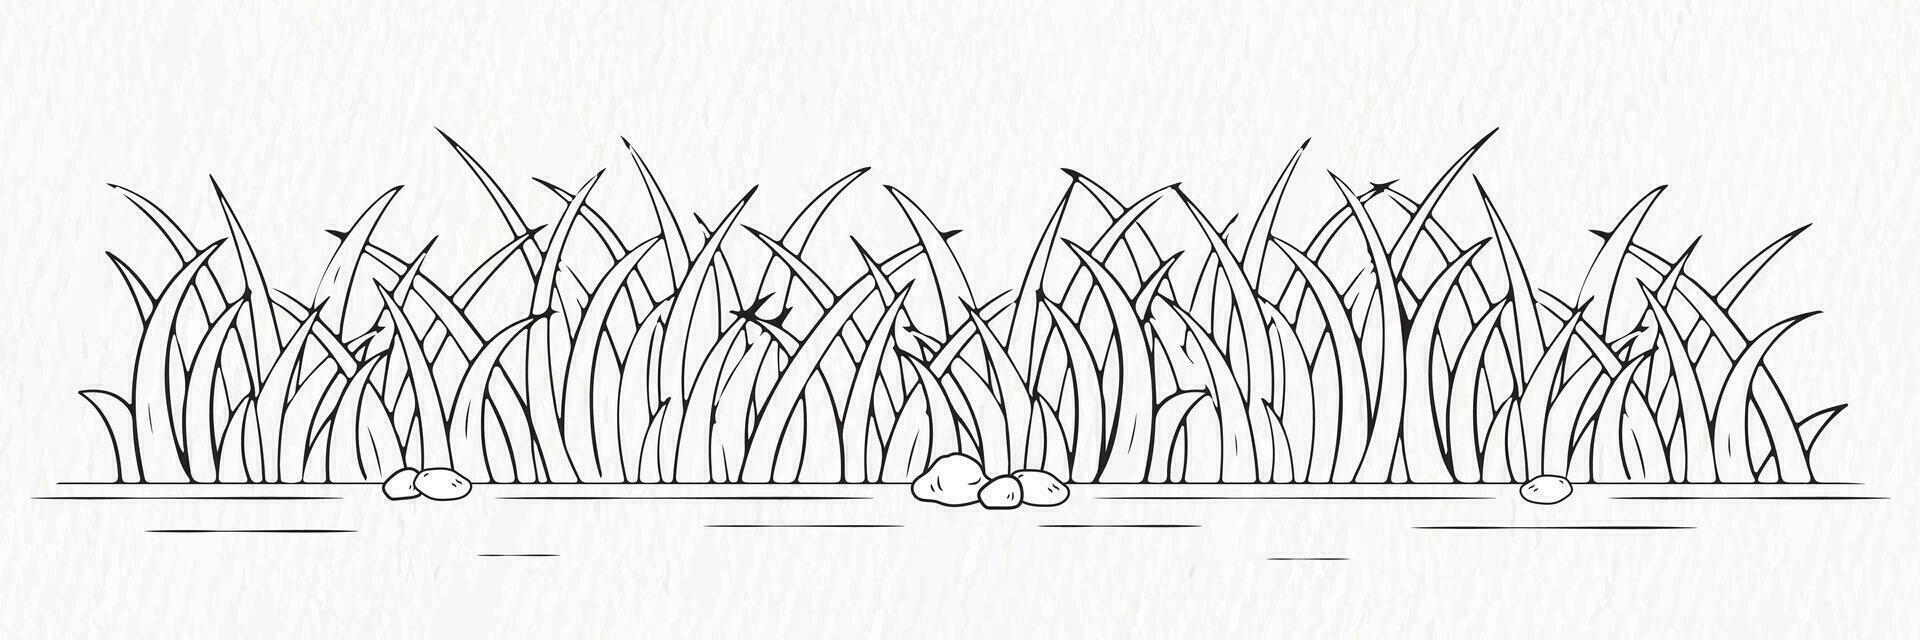 Grass with flower and stone line drawing clipart vector